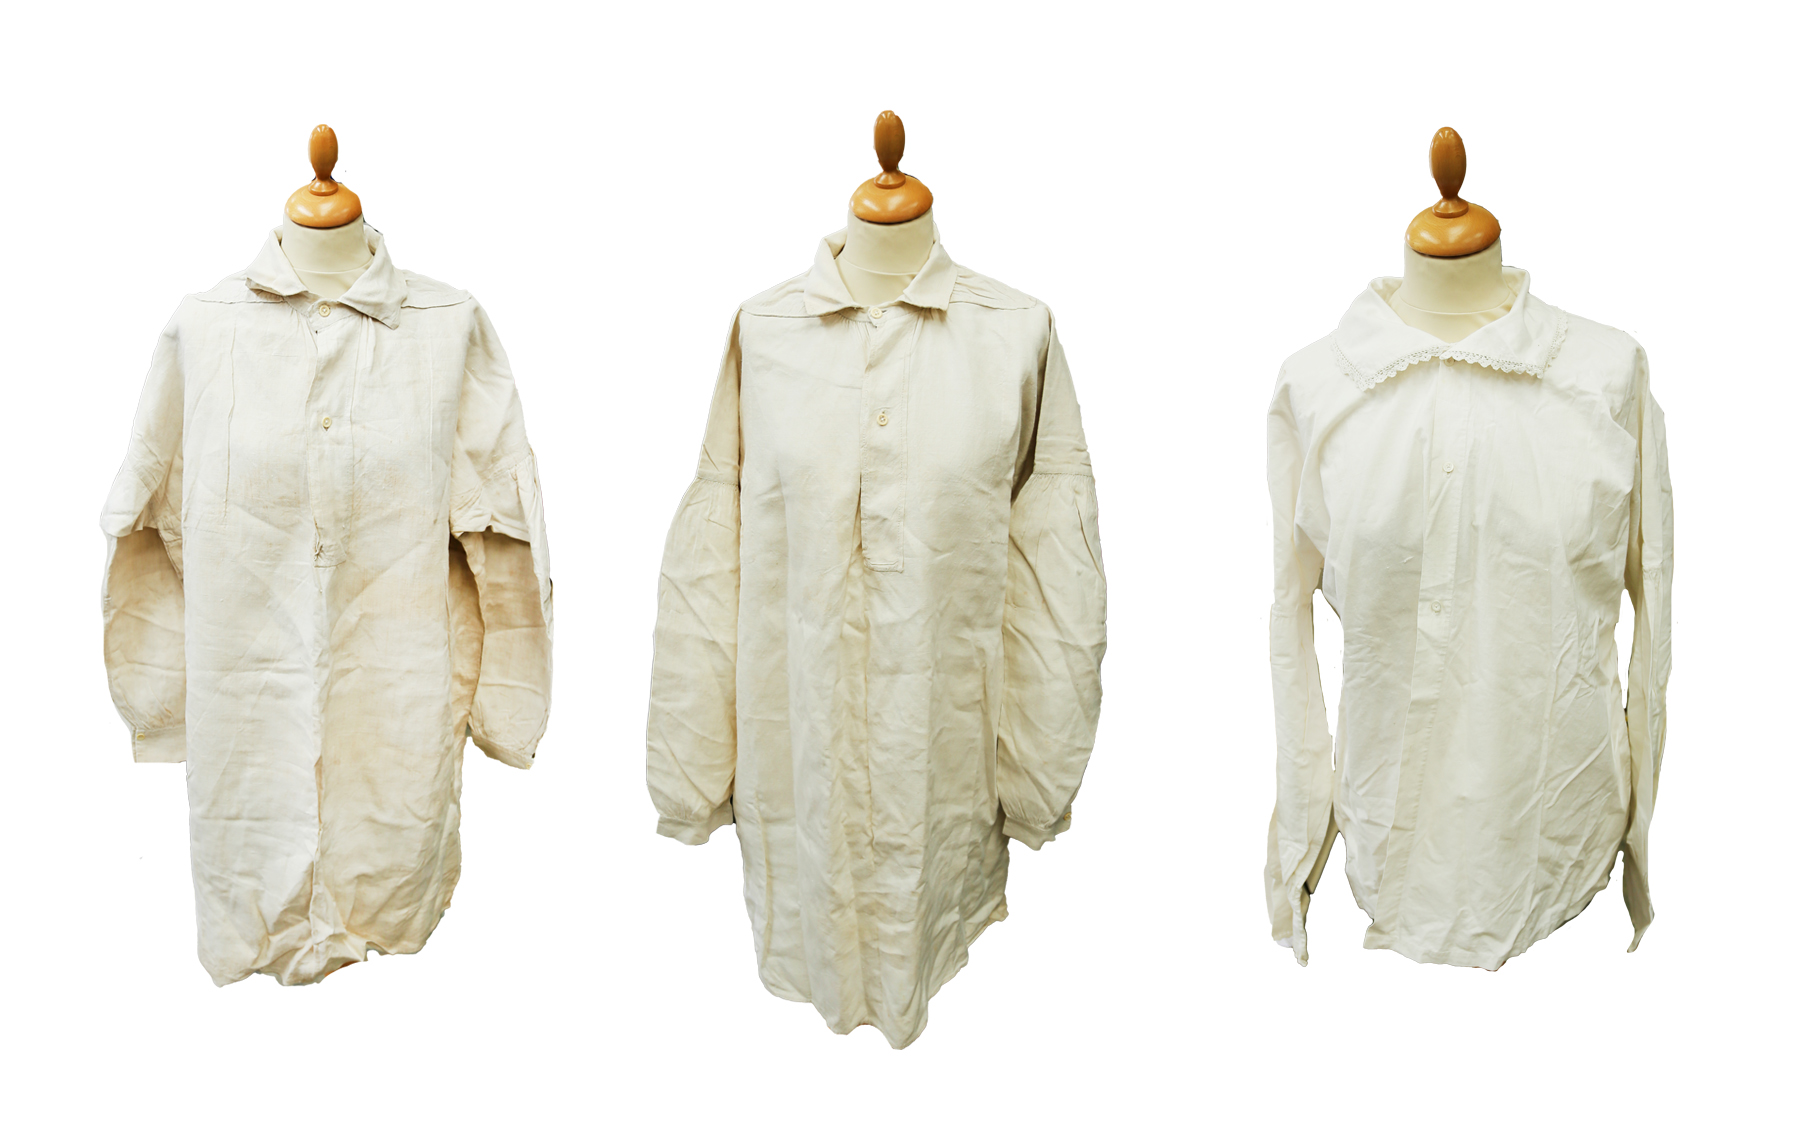 A quantity of men's white wear including shirts and hight shirts, white cotton, 1870 - 1920.